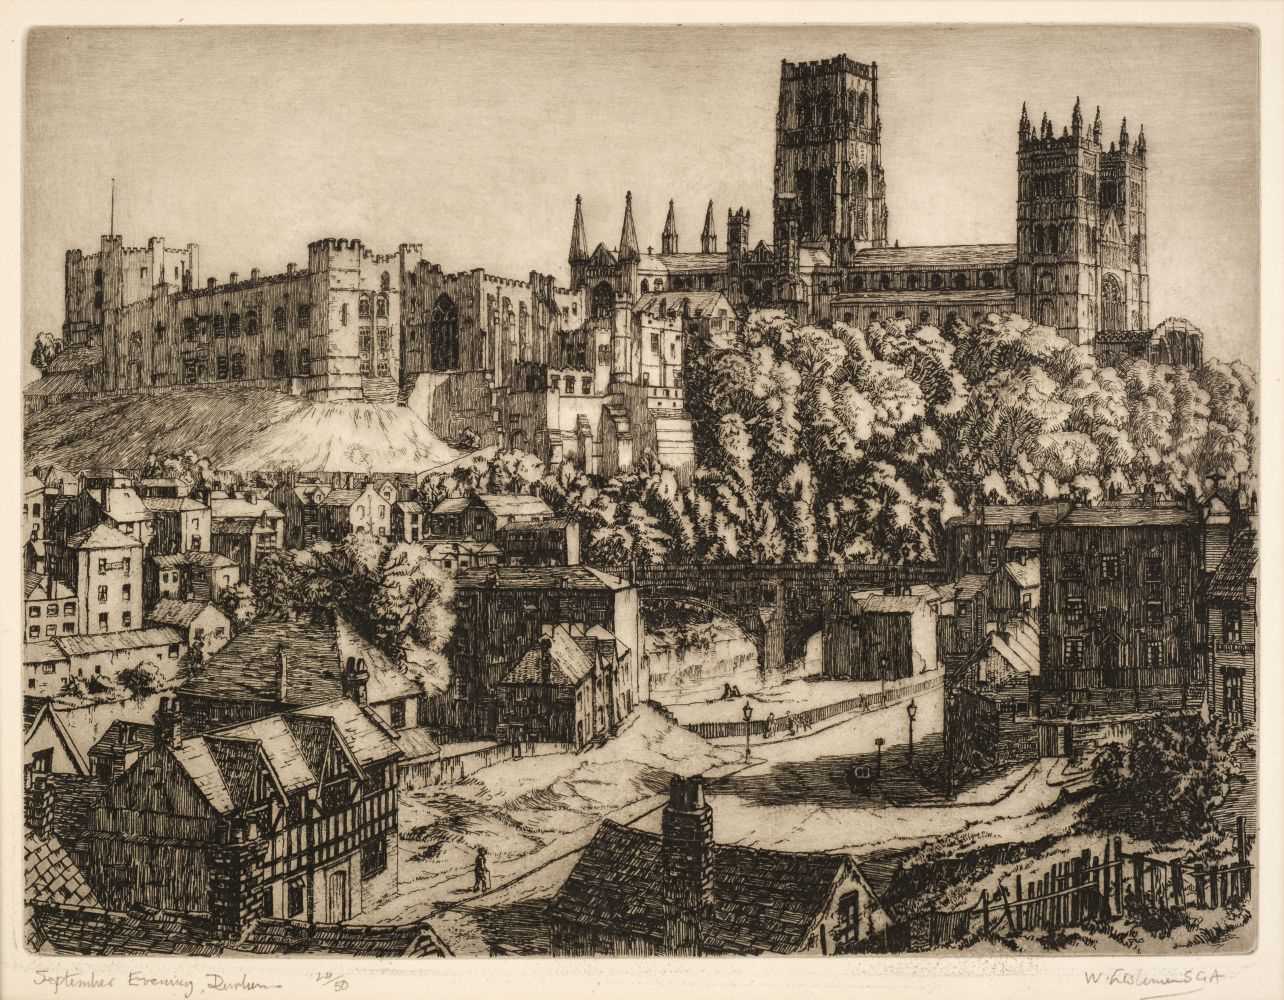 Lot 514 - Lishman (Walter, 1900-1986). September Evening, Durham, and 7 other etchings